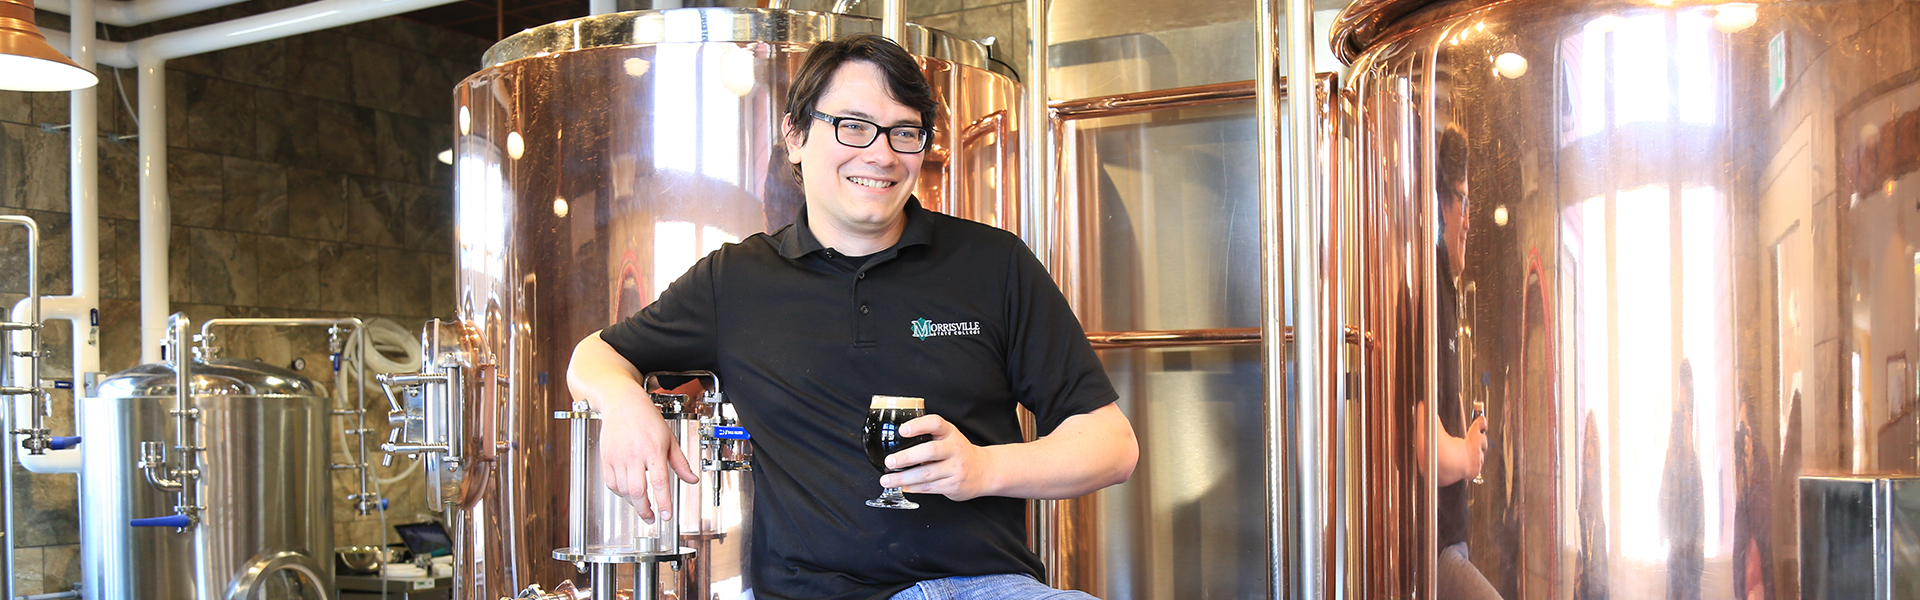 head brewer michael coons